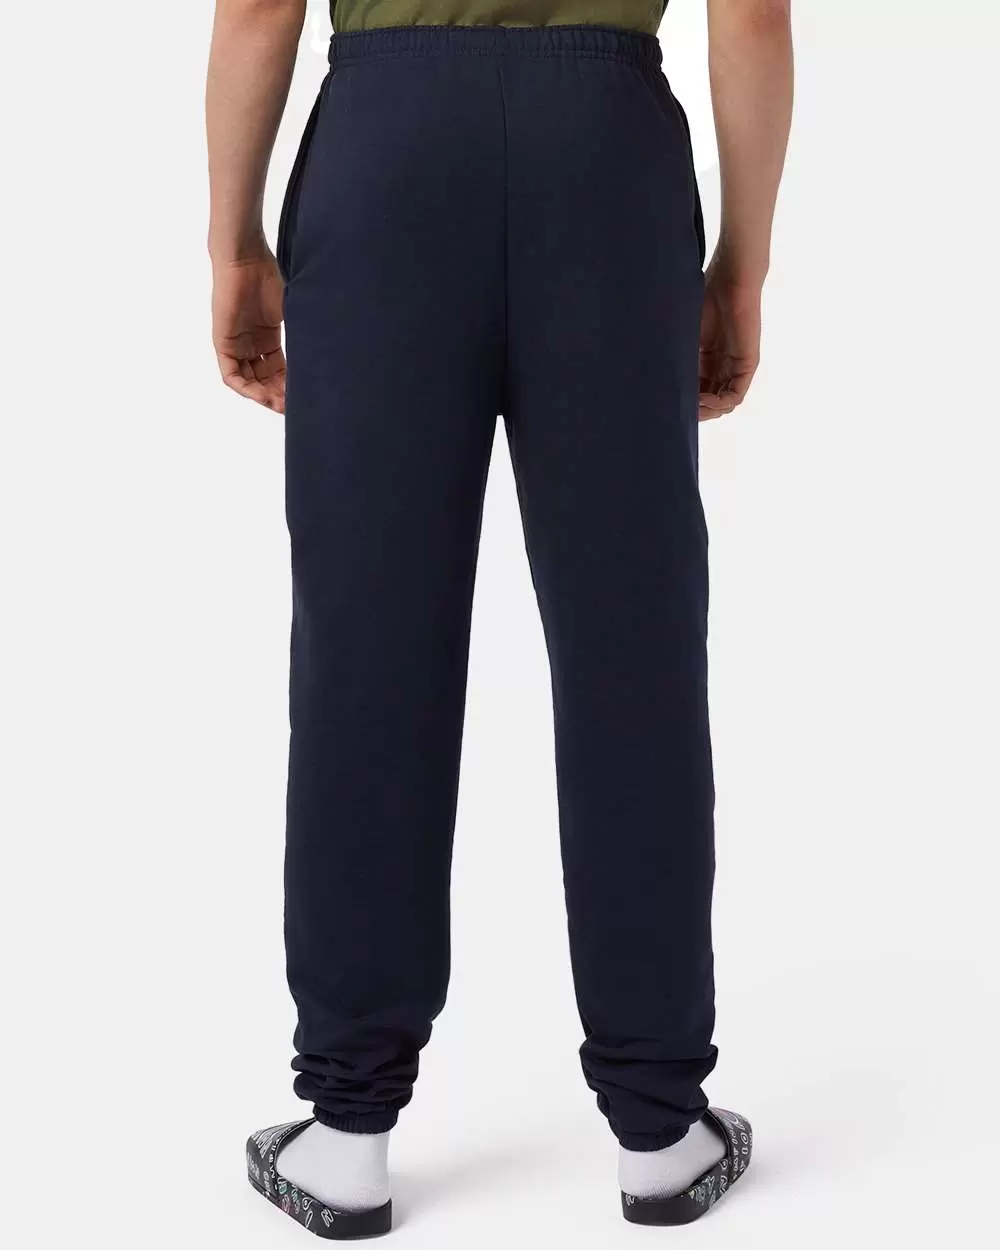 Champion Clothing P950 Powerblend® Sweatpants with Pockets - From